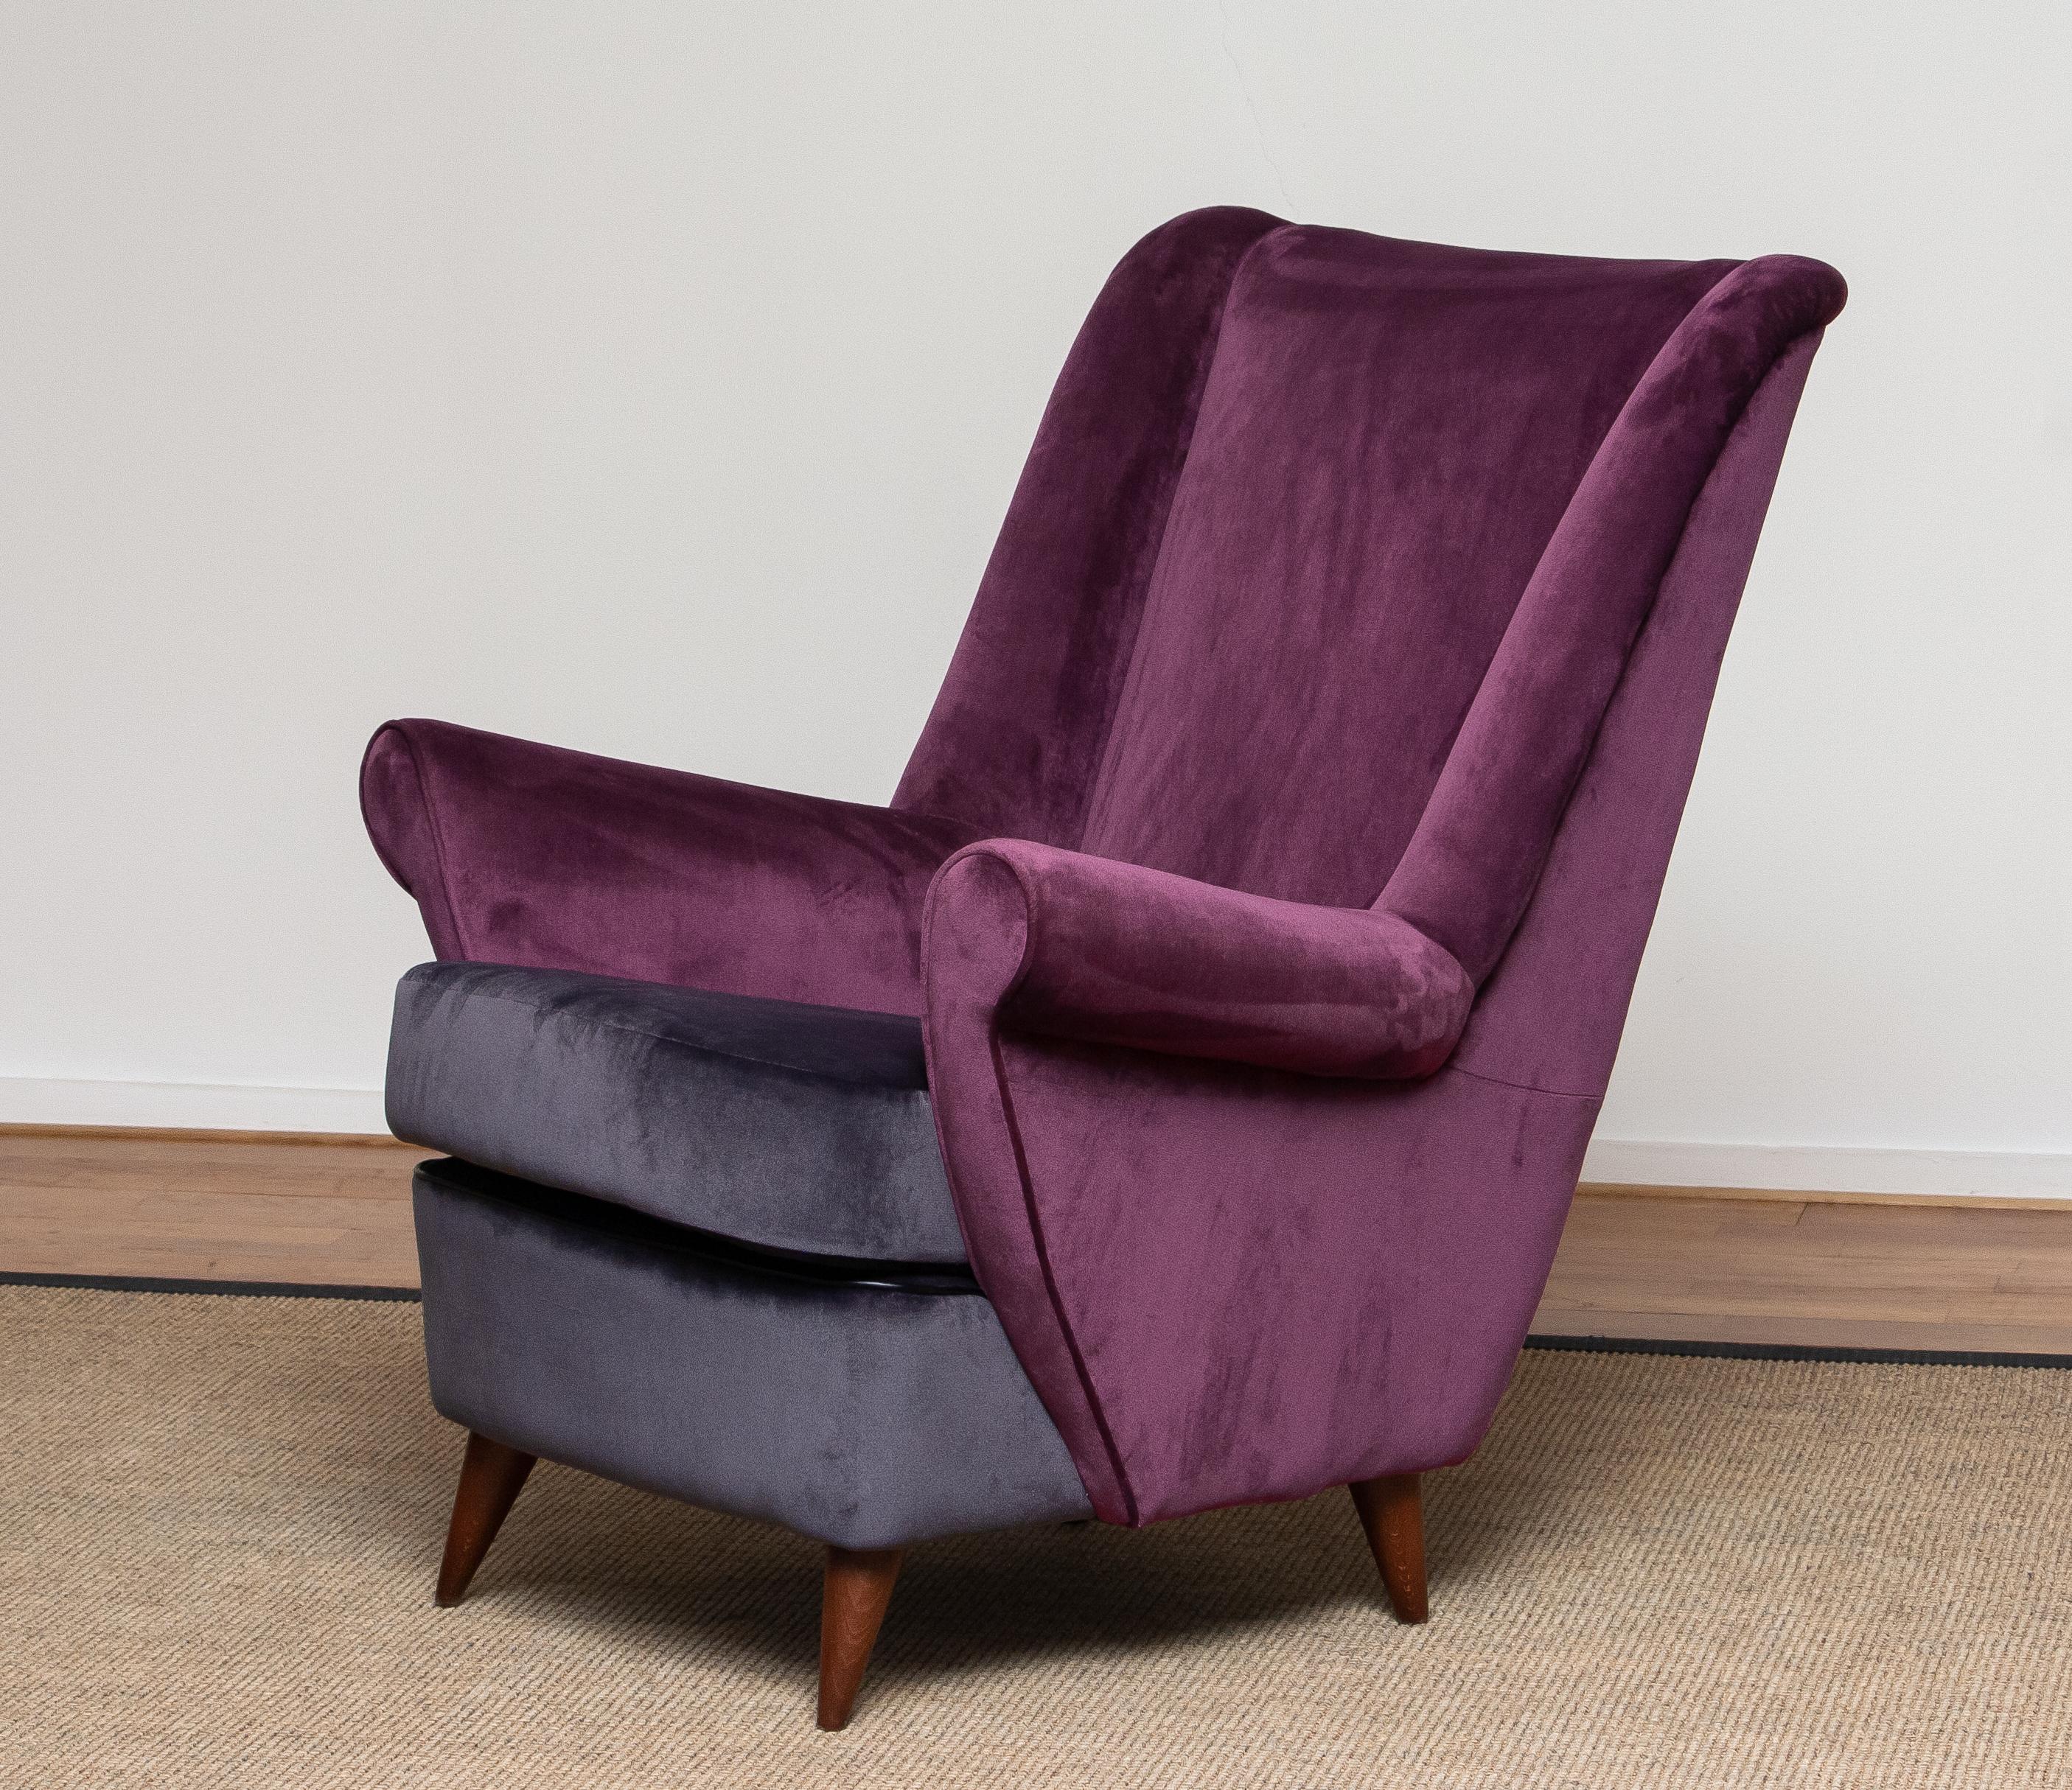 Absolutely beautiful 1950's Loung / easy chair designed by Gio Ponti and made by ISA in Bergamo in Italy. The fabulous color combination and choice of fabric, magenta and and dark gray, makes this chair a real eye catcher. This chairs is completely